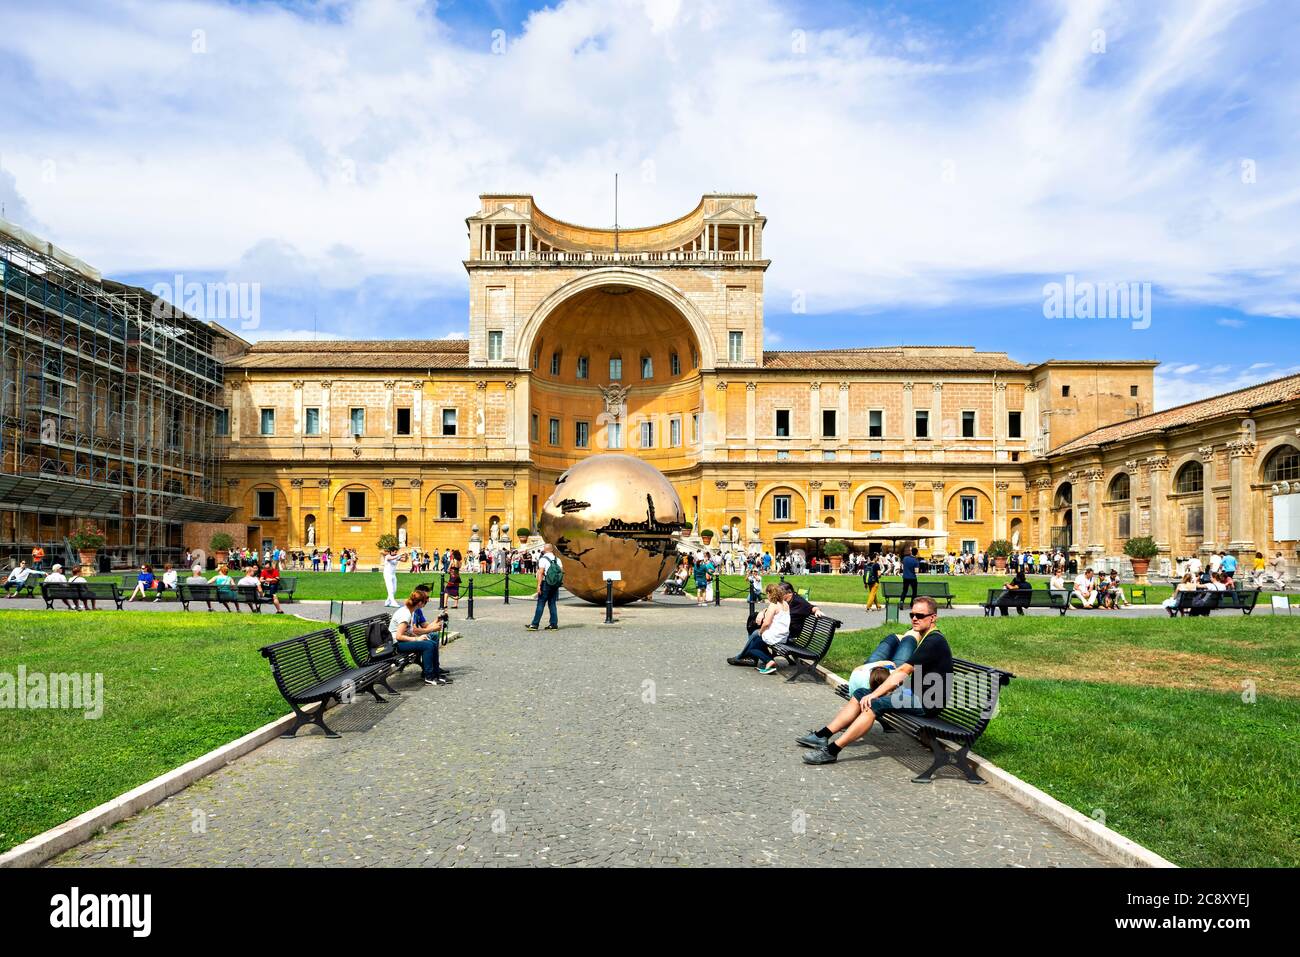 Vatican city, Vatican - September 22, 2014:  Tourists walk in the Courtyard of the Pine Cone in Vatican Museums. The Metal globe statue in the courtya Stock Photo